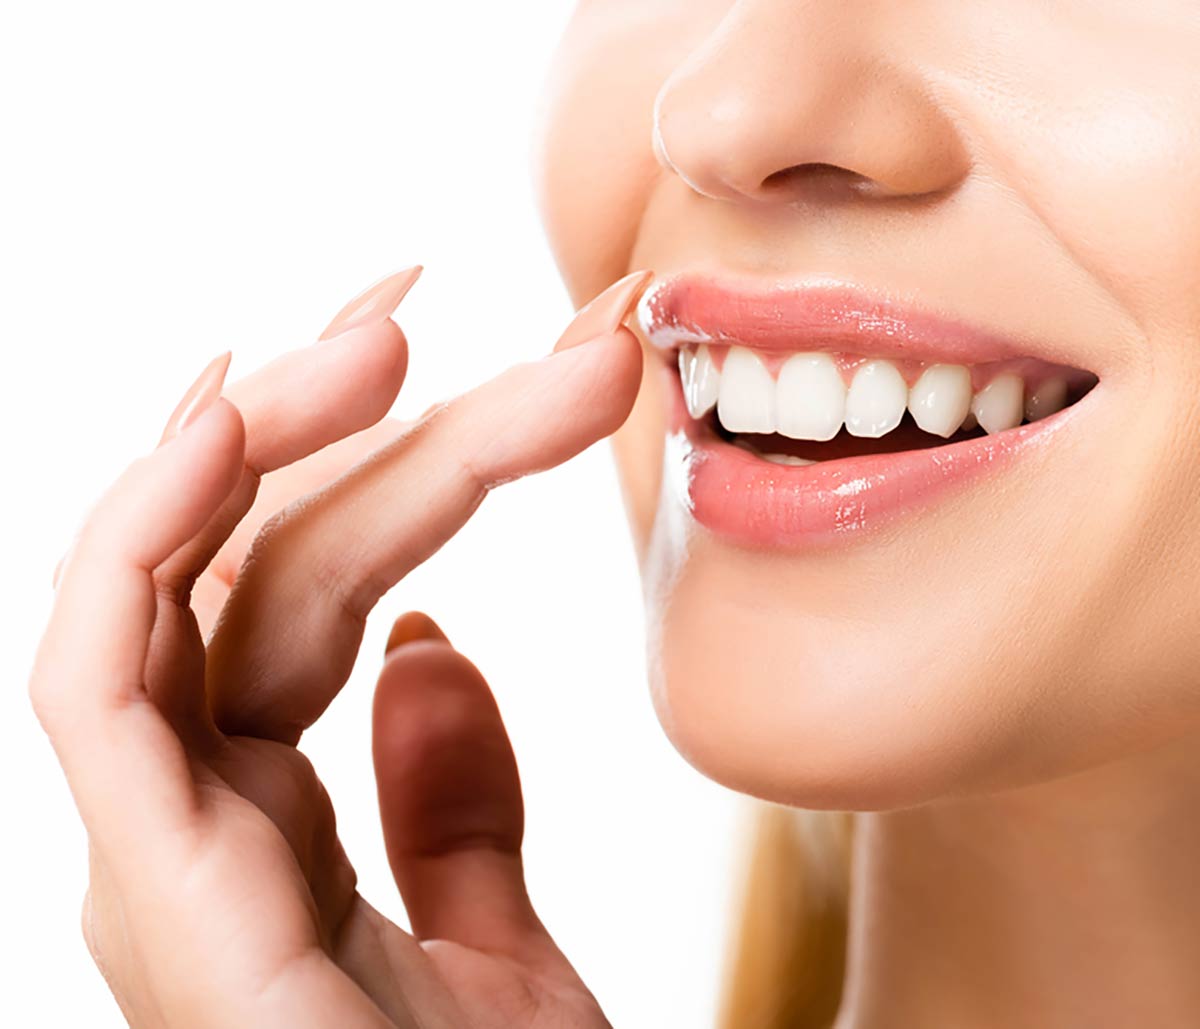 Say goodbye to the teeth gap with our veneers treatment in Aliso Viejo